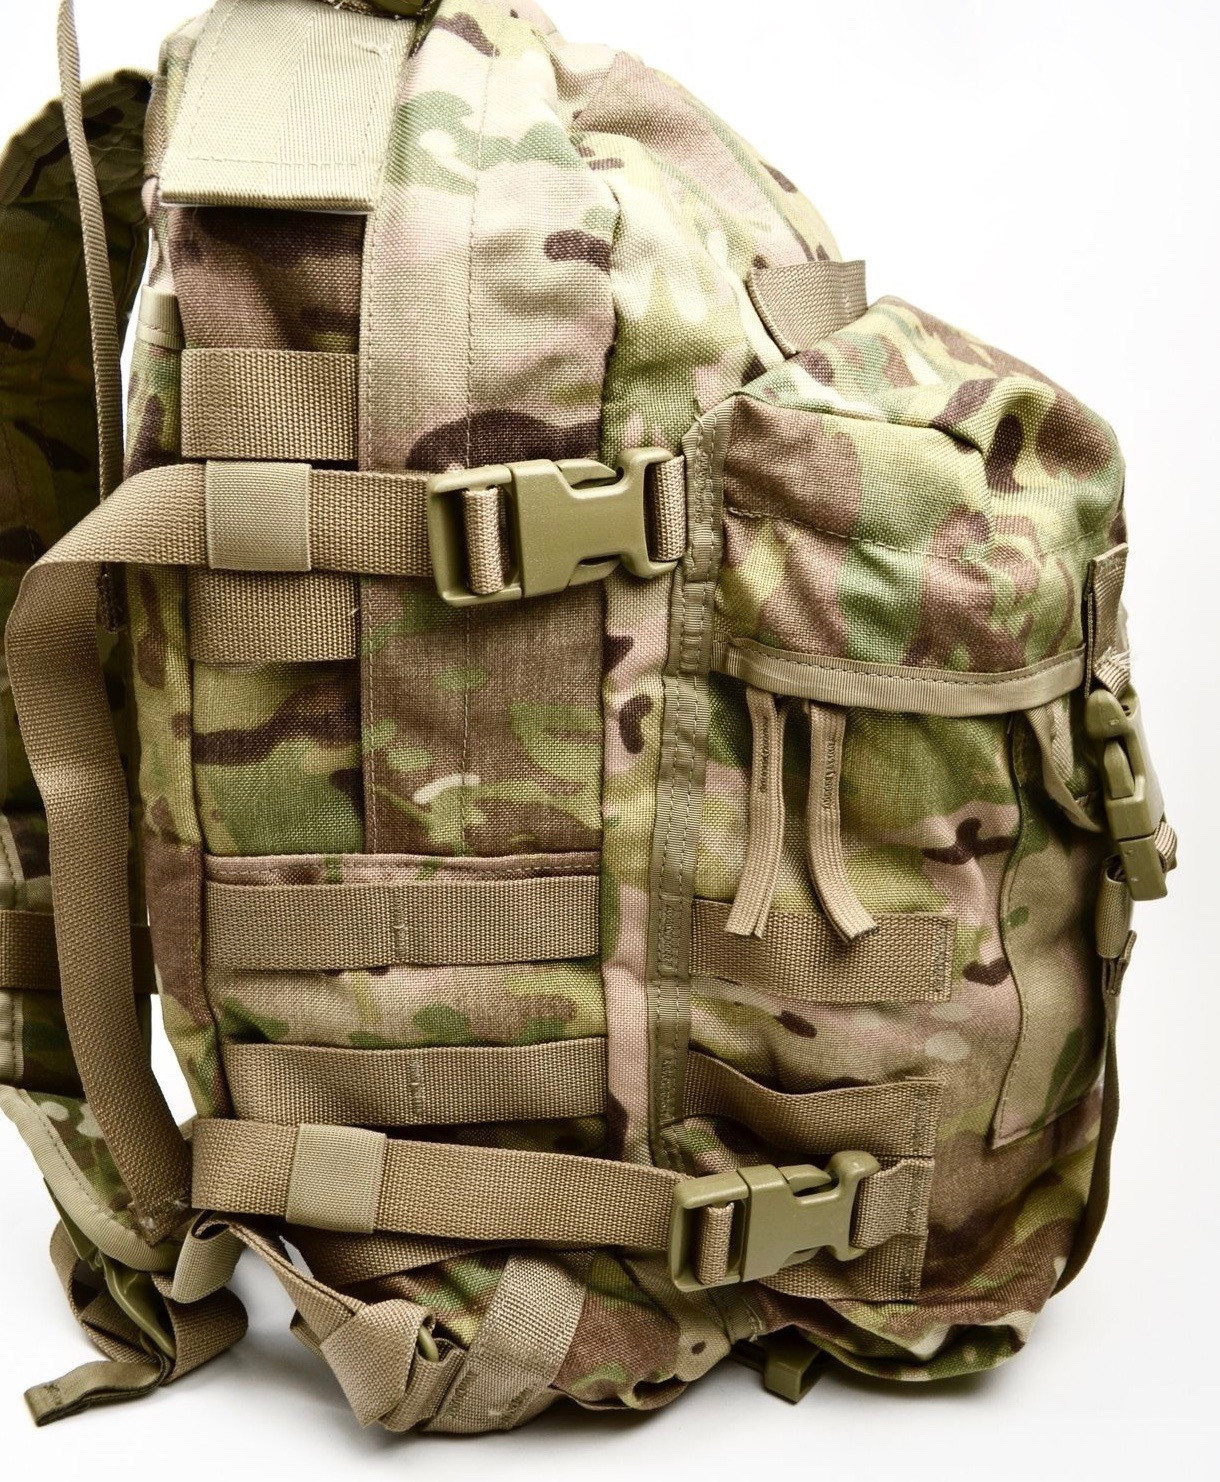 US ARMY MILITARY ISSUE 3 DAY ASSAULT PACK MULTICAM OCP w/Free Hyd Carrier